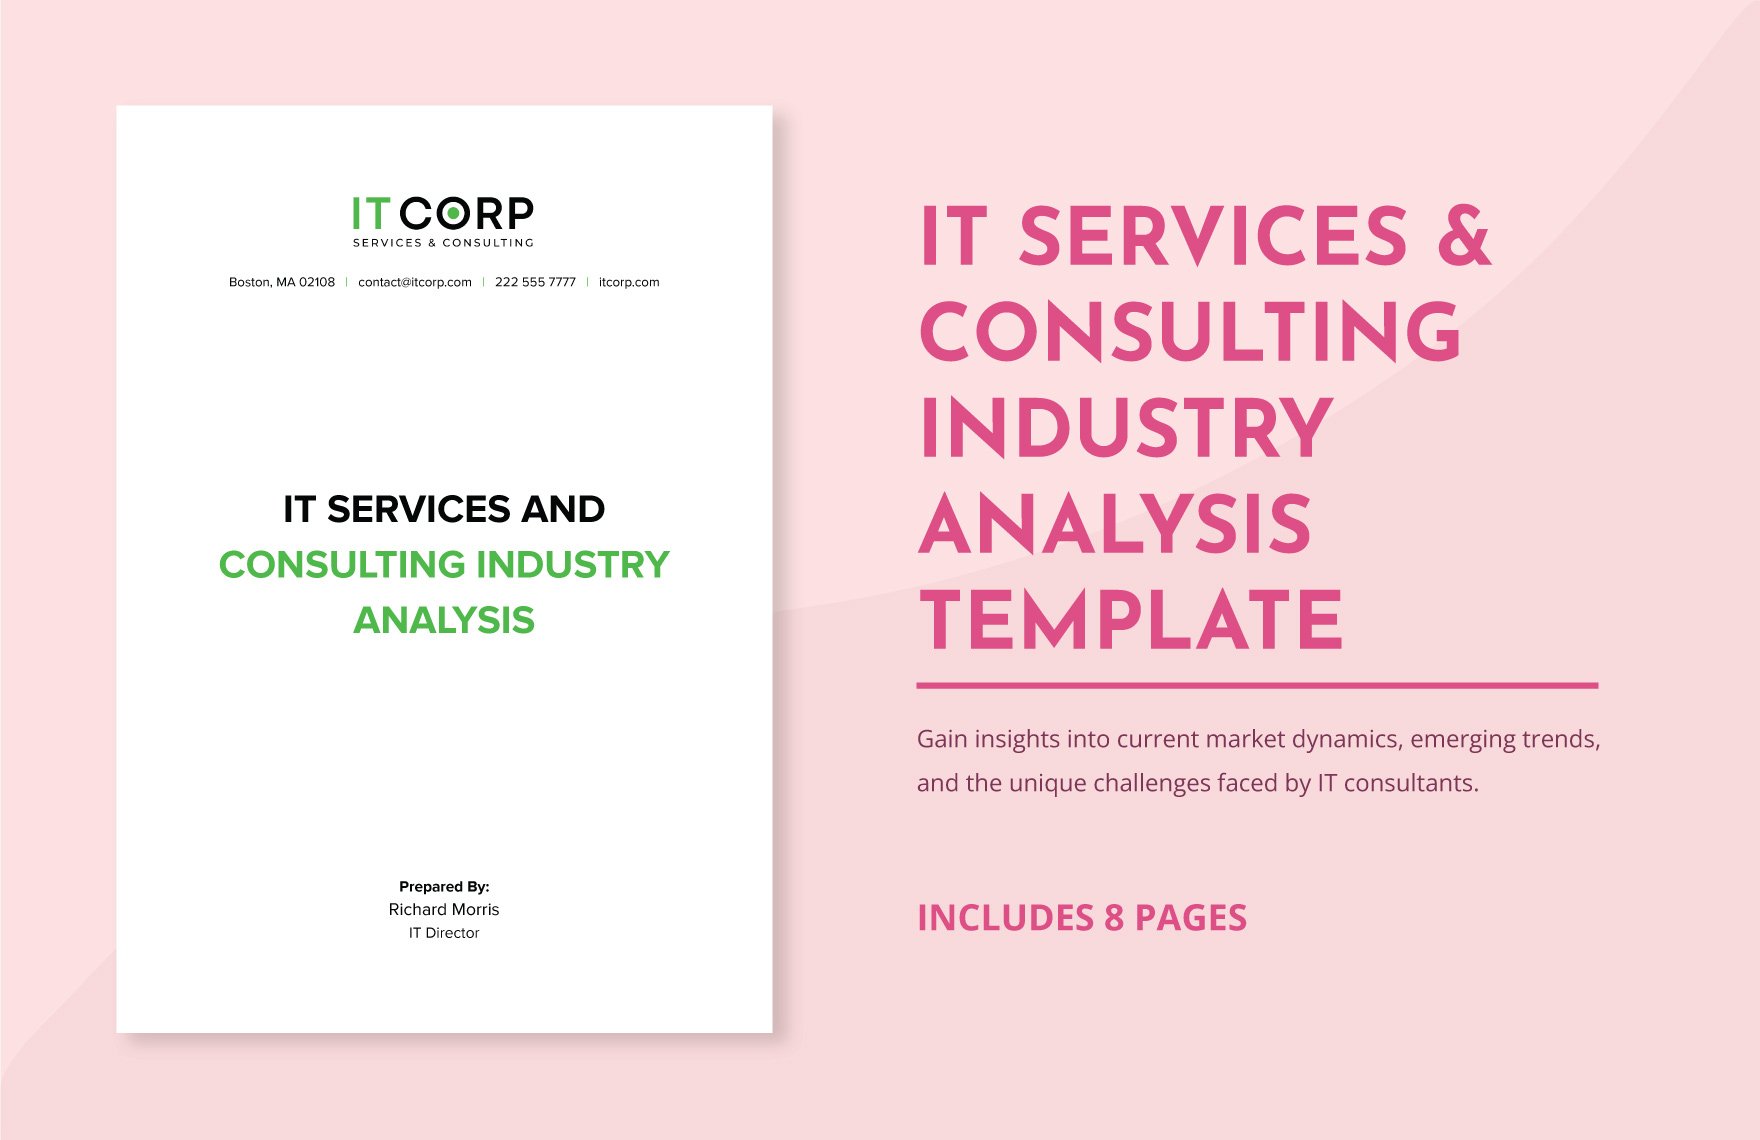 IT Services & Consulting Industry Analysis Template